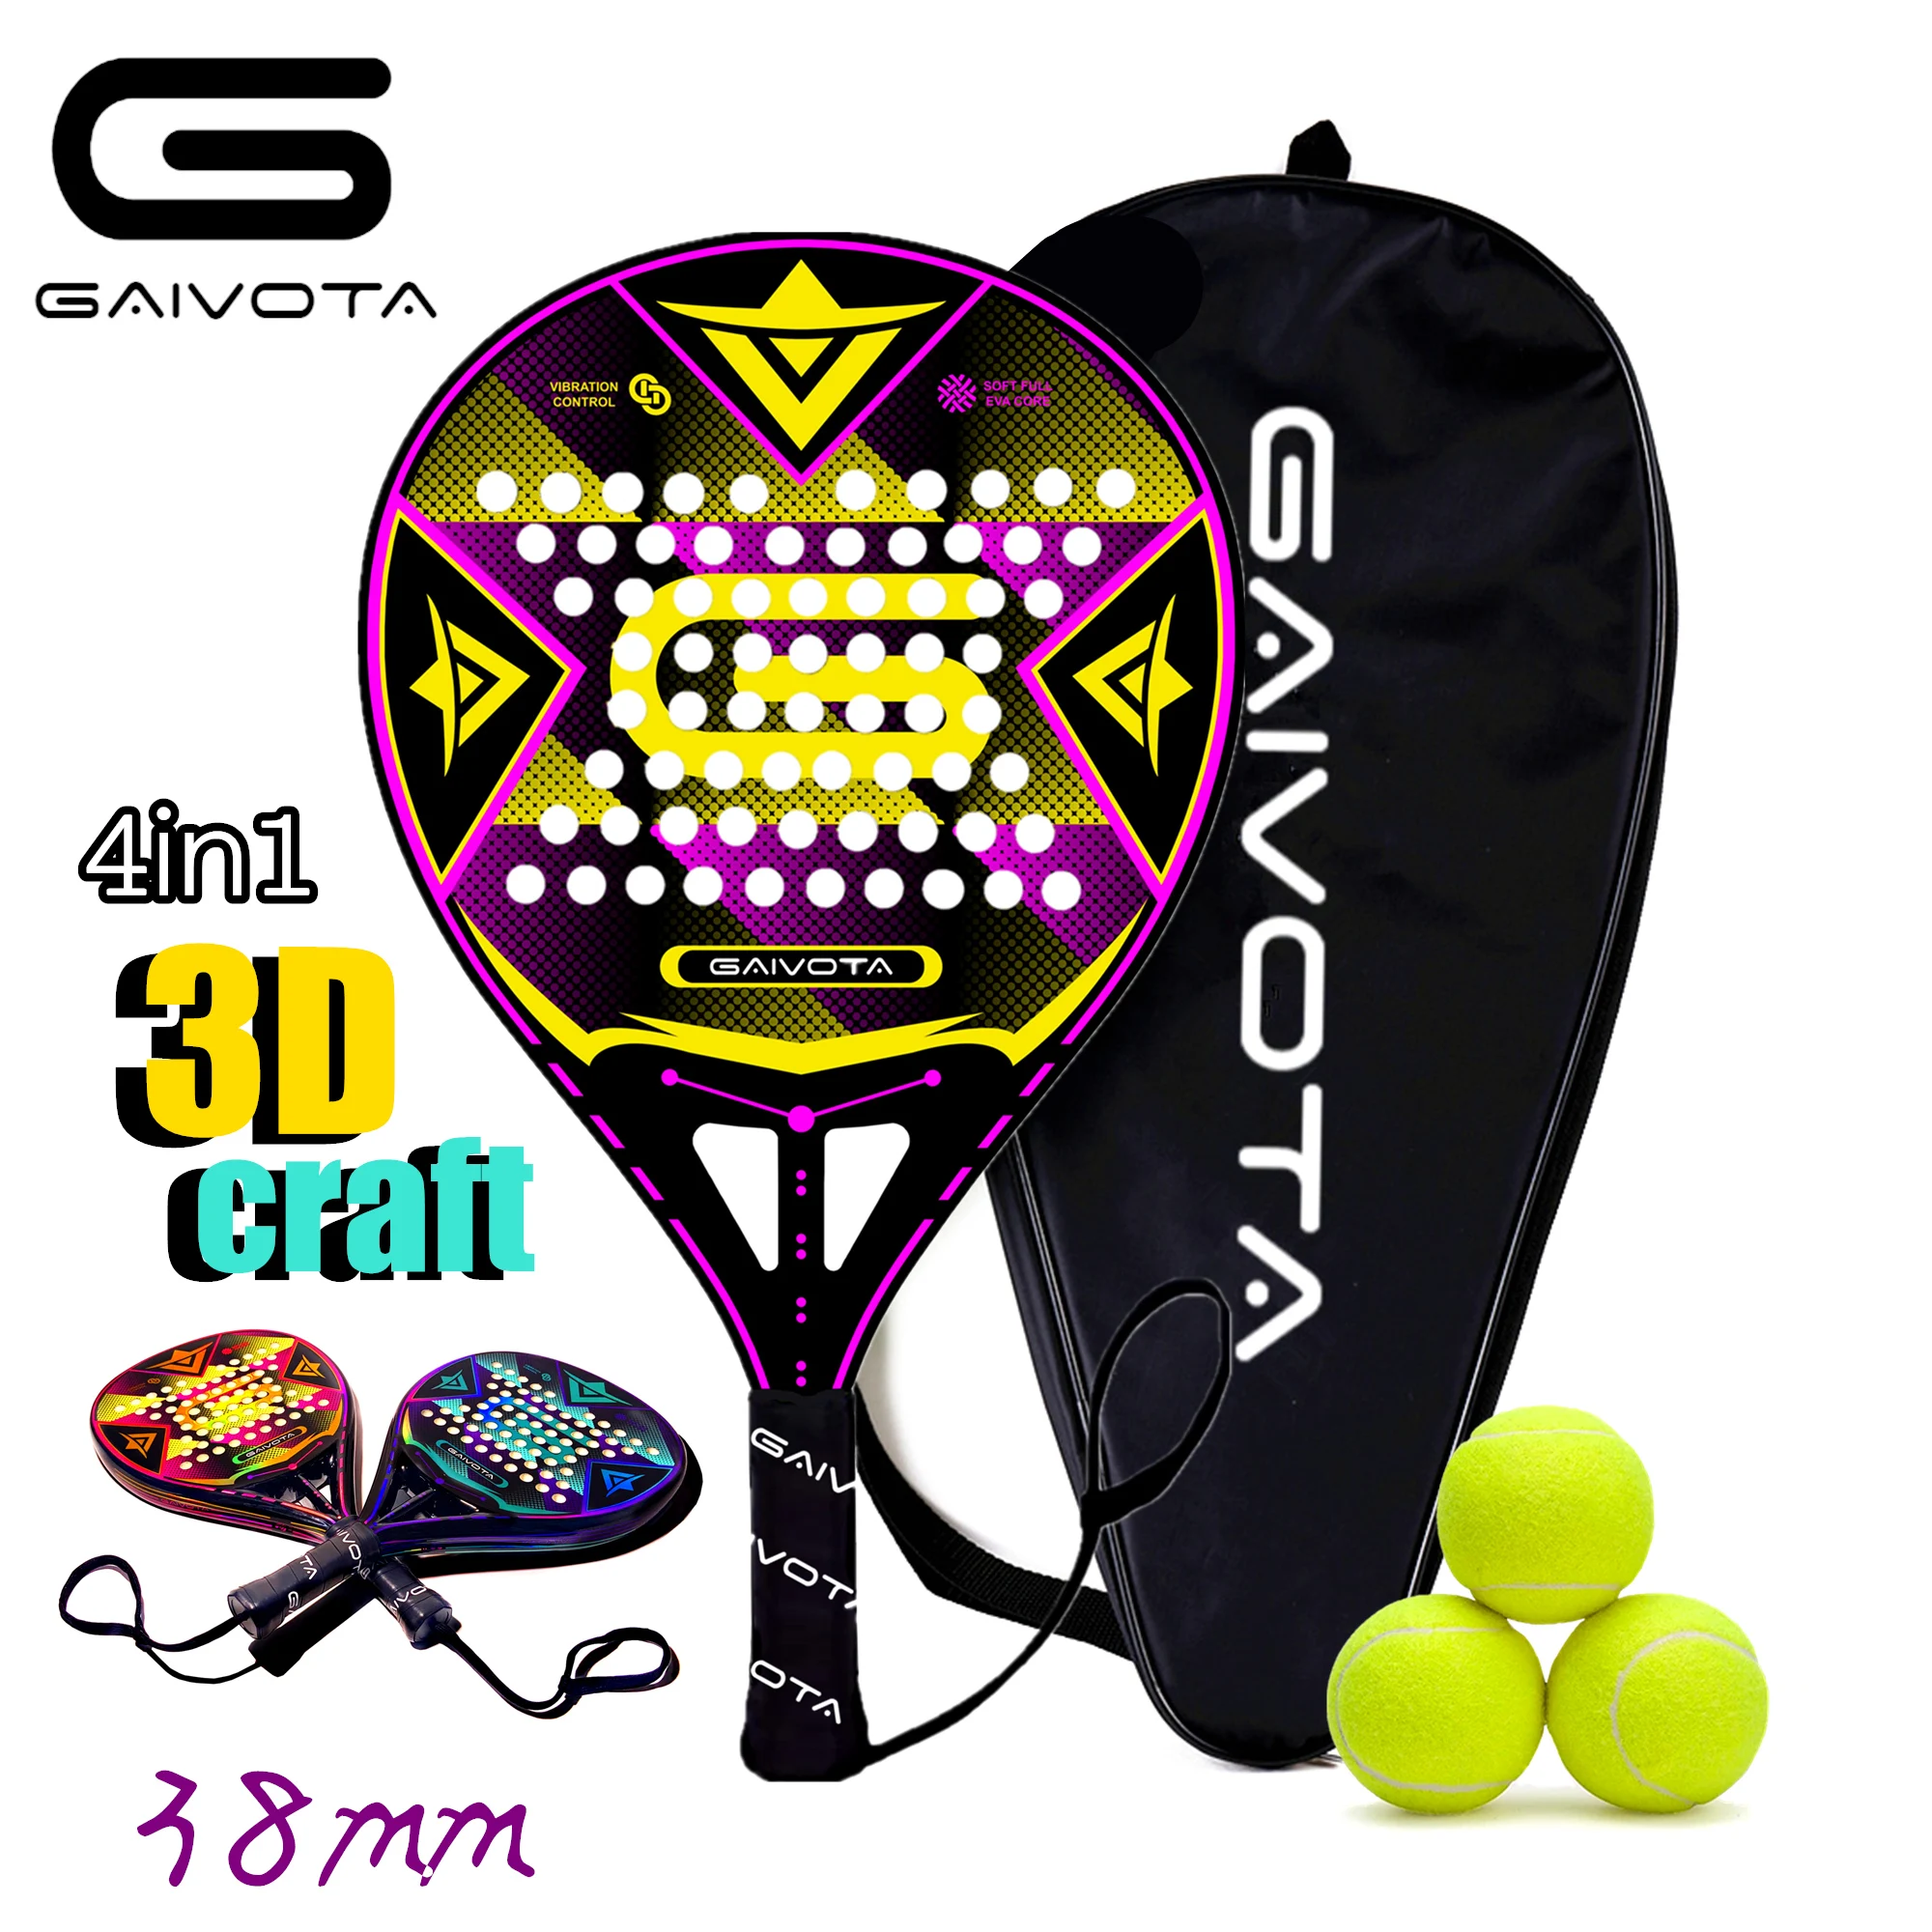 GAIVOTA new carbon and fiberglass cage tennis racket soft paddle racket with bag lid tennis racket carbon